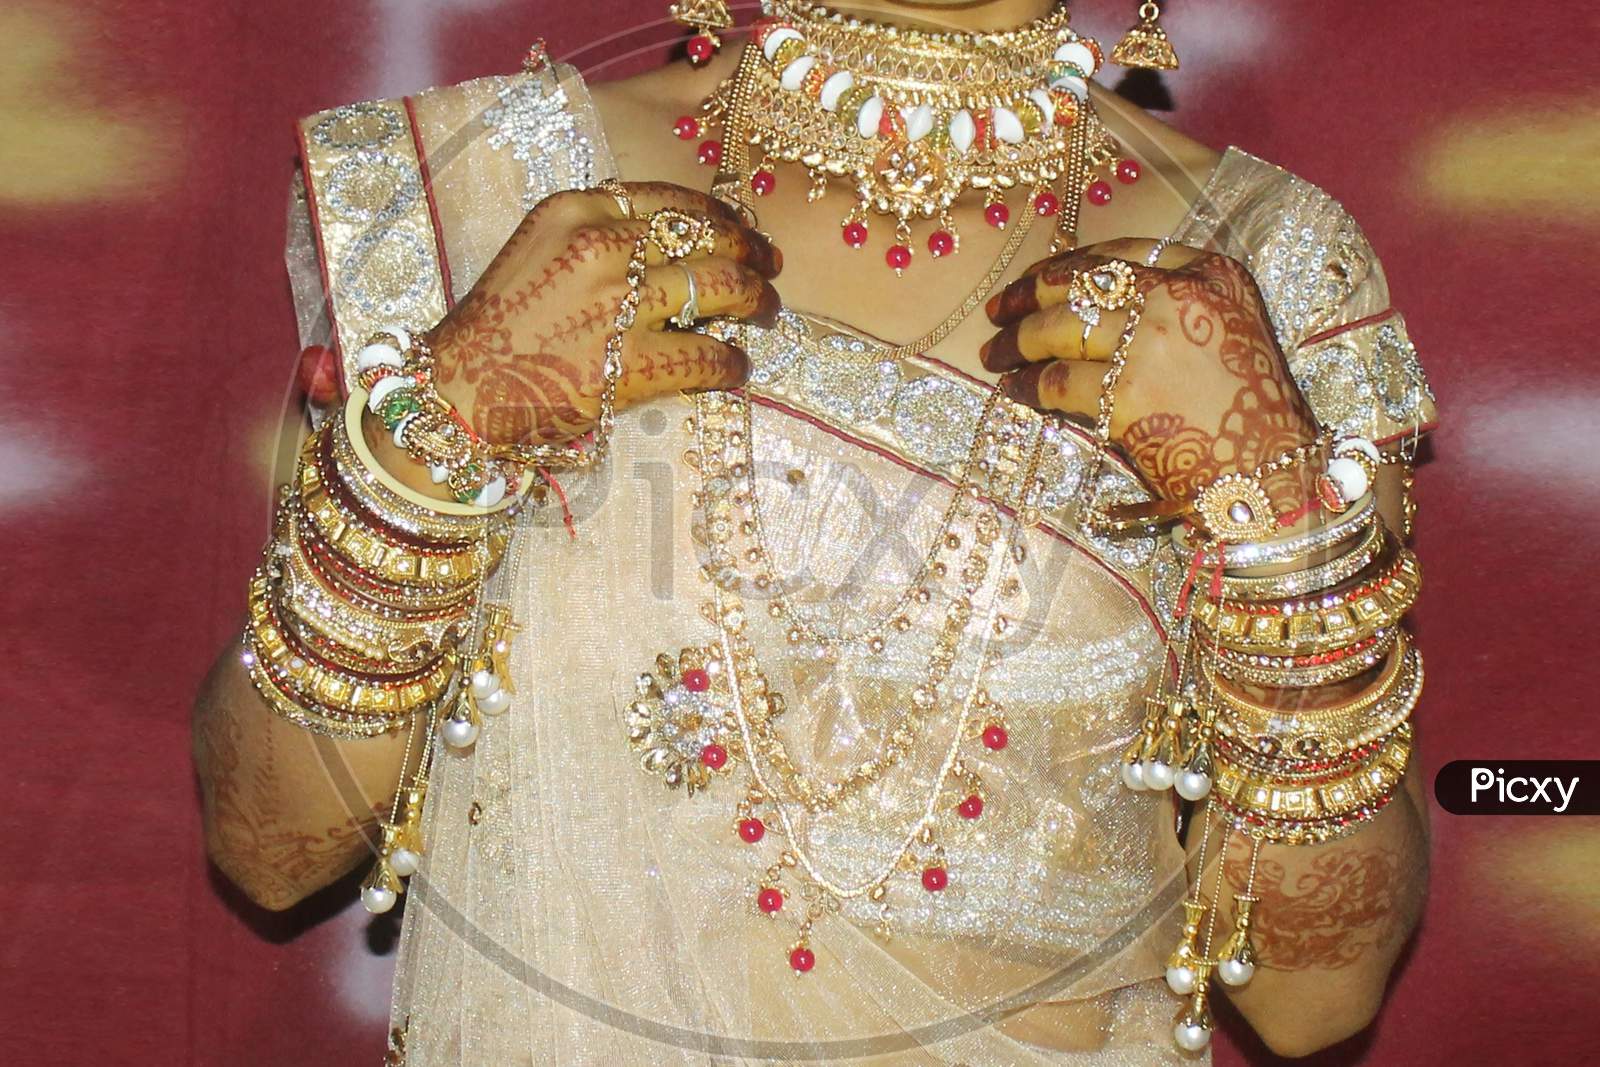 Indian marriage attire and lifestyle. Indian Gujarati Bride or Dulhan in her traditional ethnic wedding dress.Indian marriage attire and lifestyle.